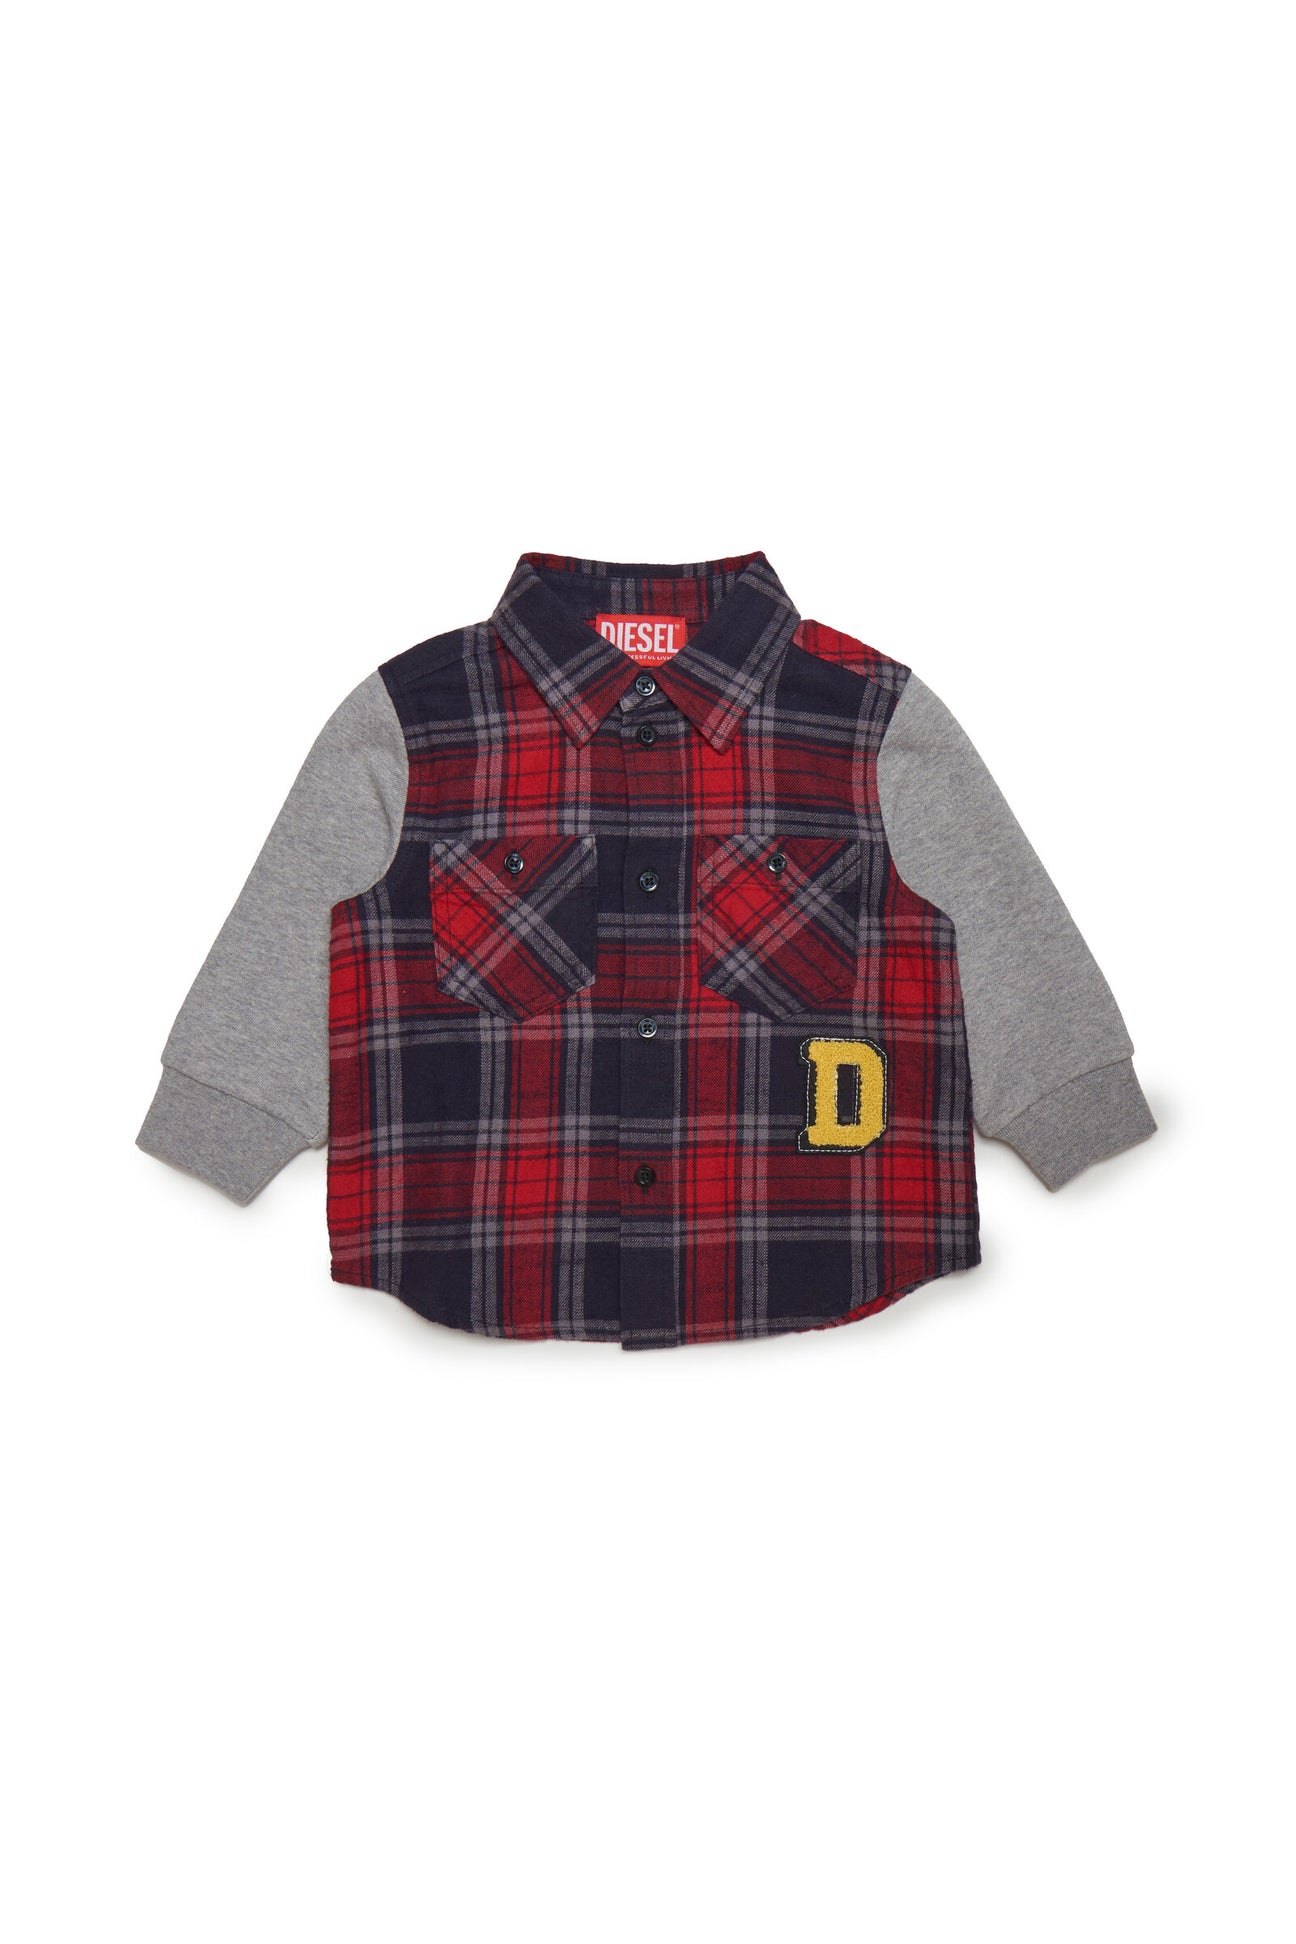 Flannel and jersey plaid shirt with patch Flannel and jersey plaid shirt with patch